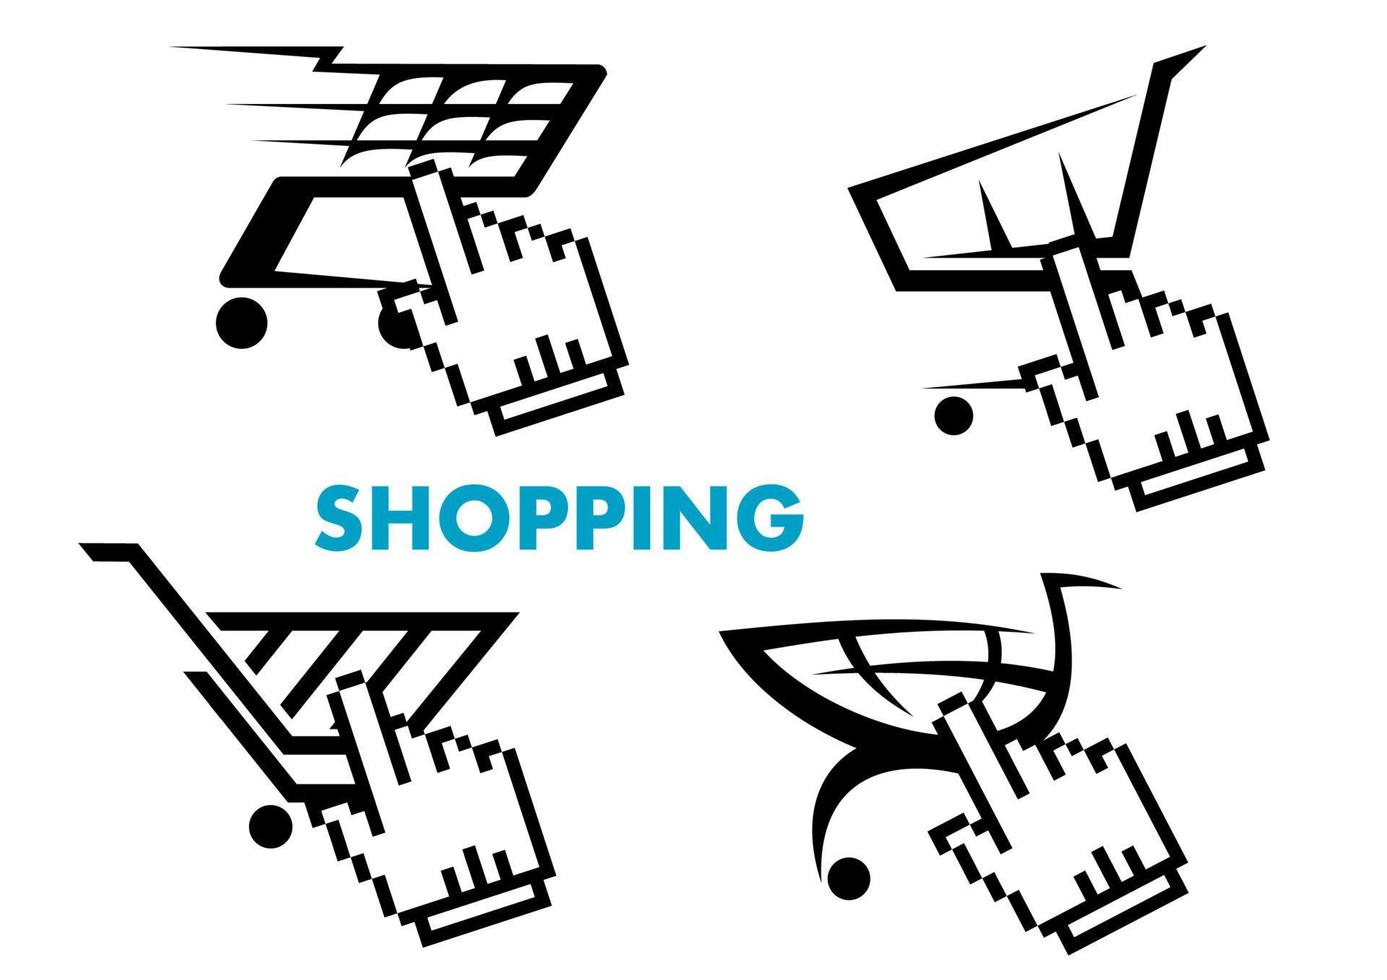 Shopping cart and retail business icons set vector